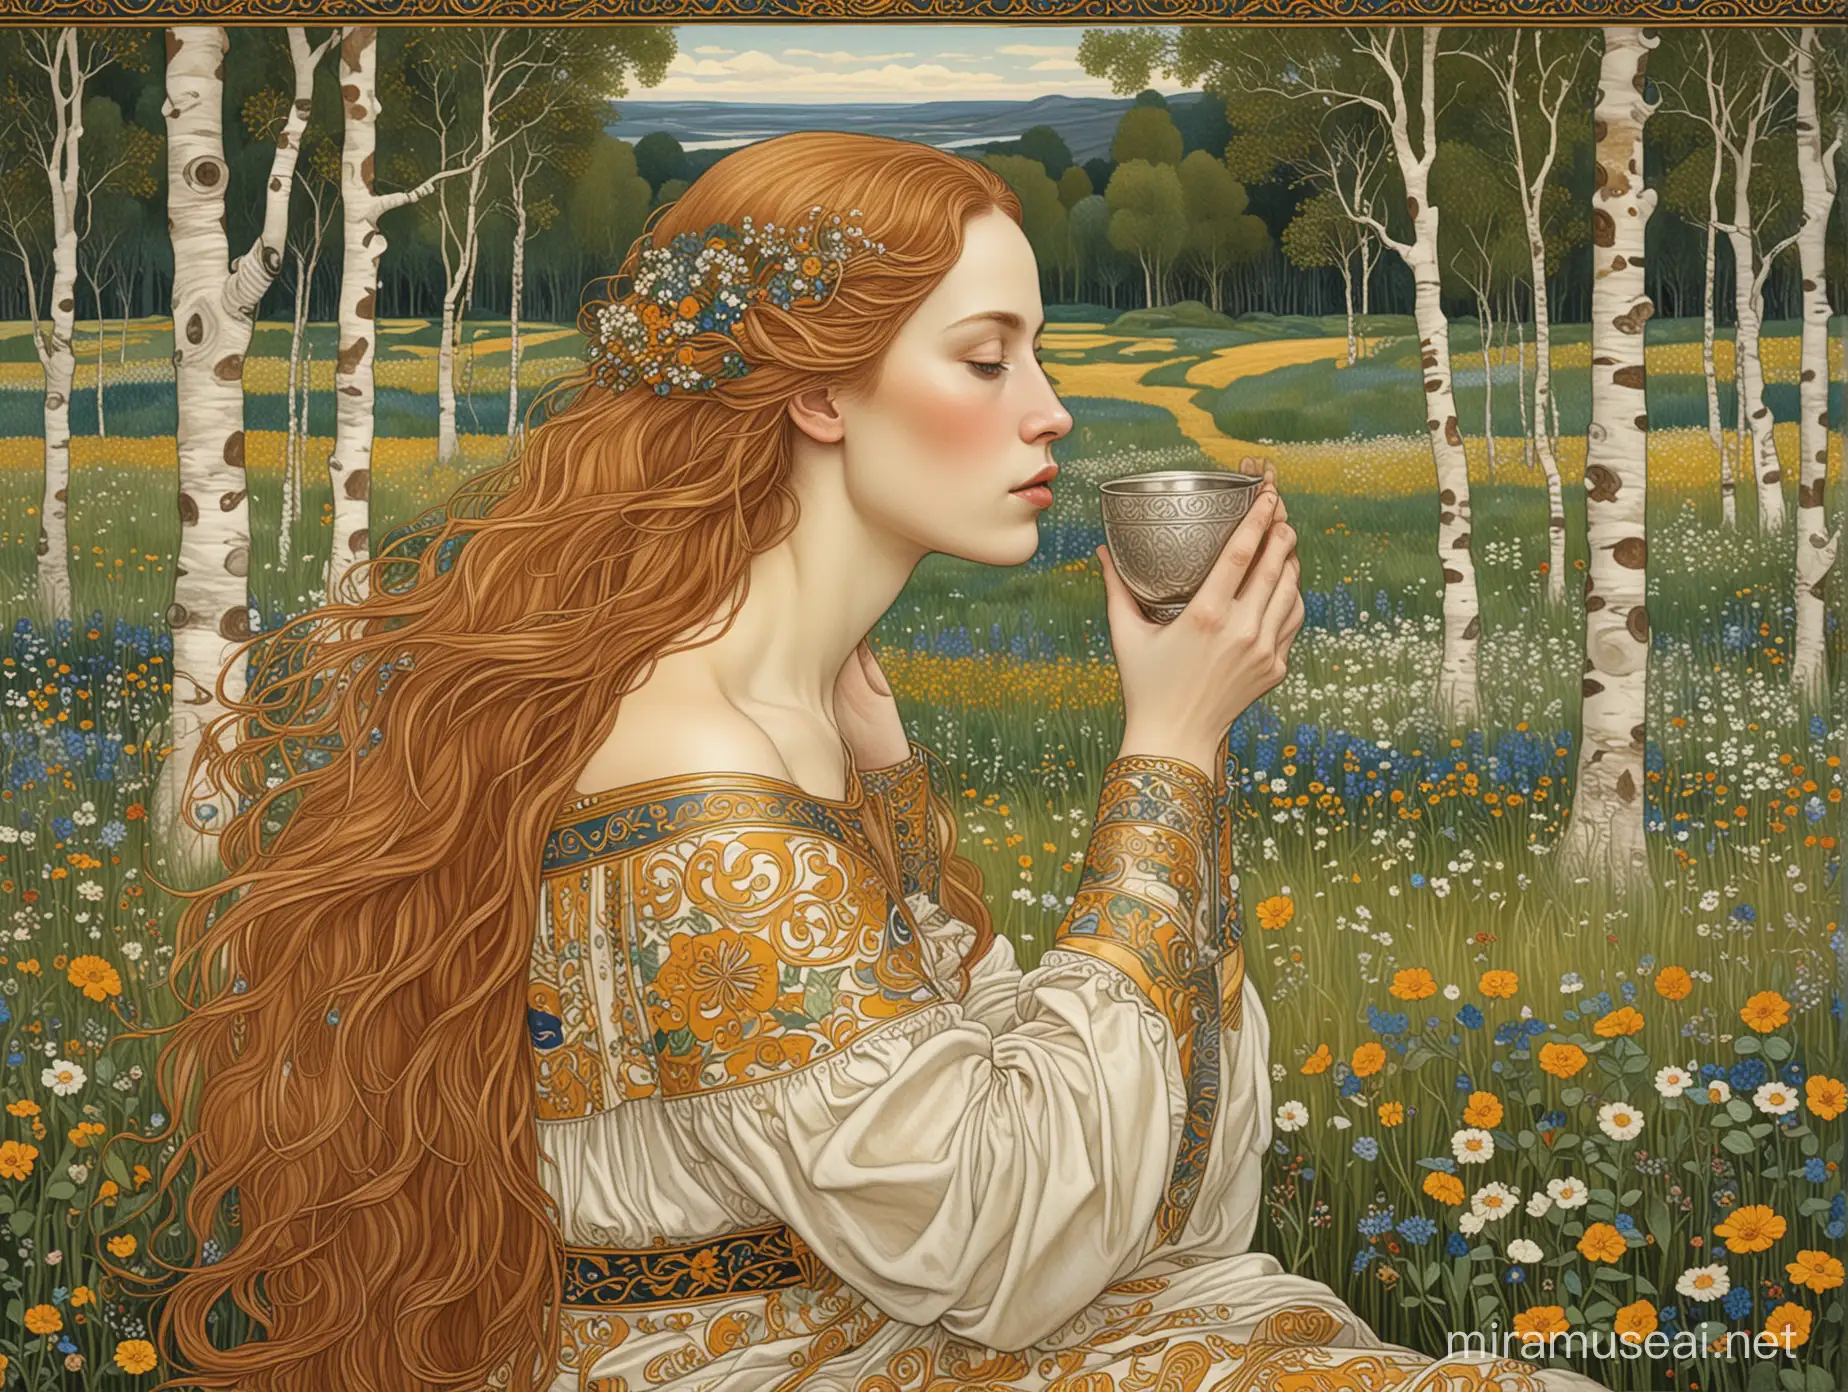 Medieval Woman Drinking from Silver Cup in Flowery Meadow Gustav Klimt Style